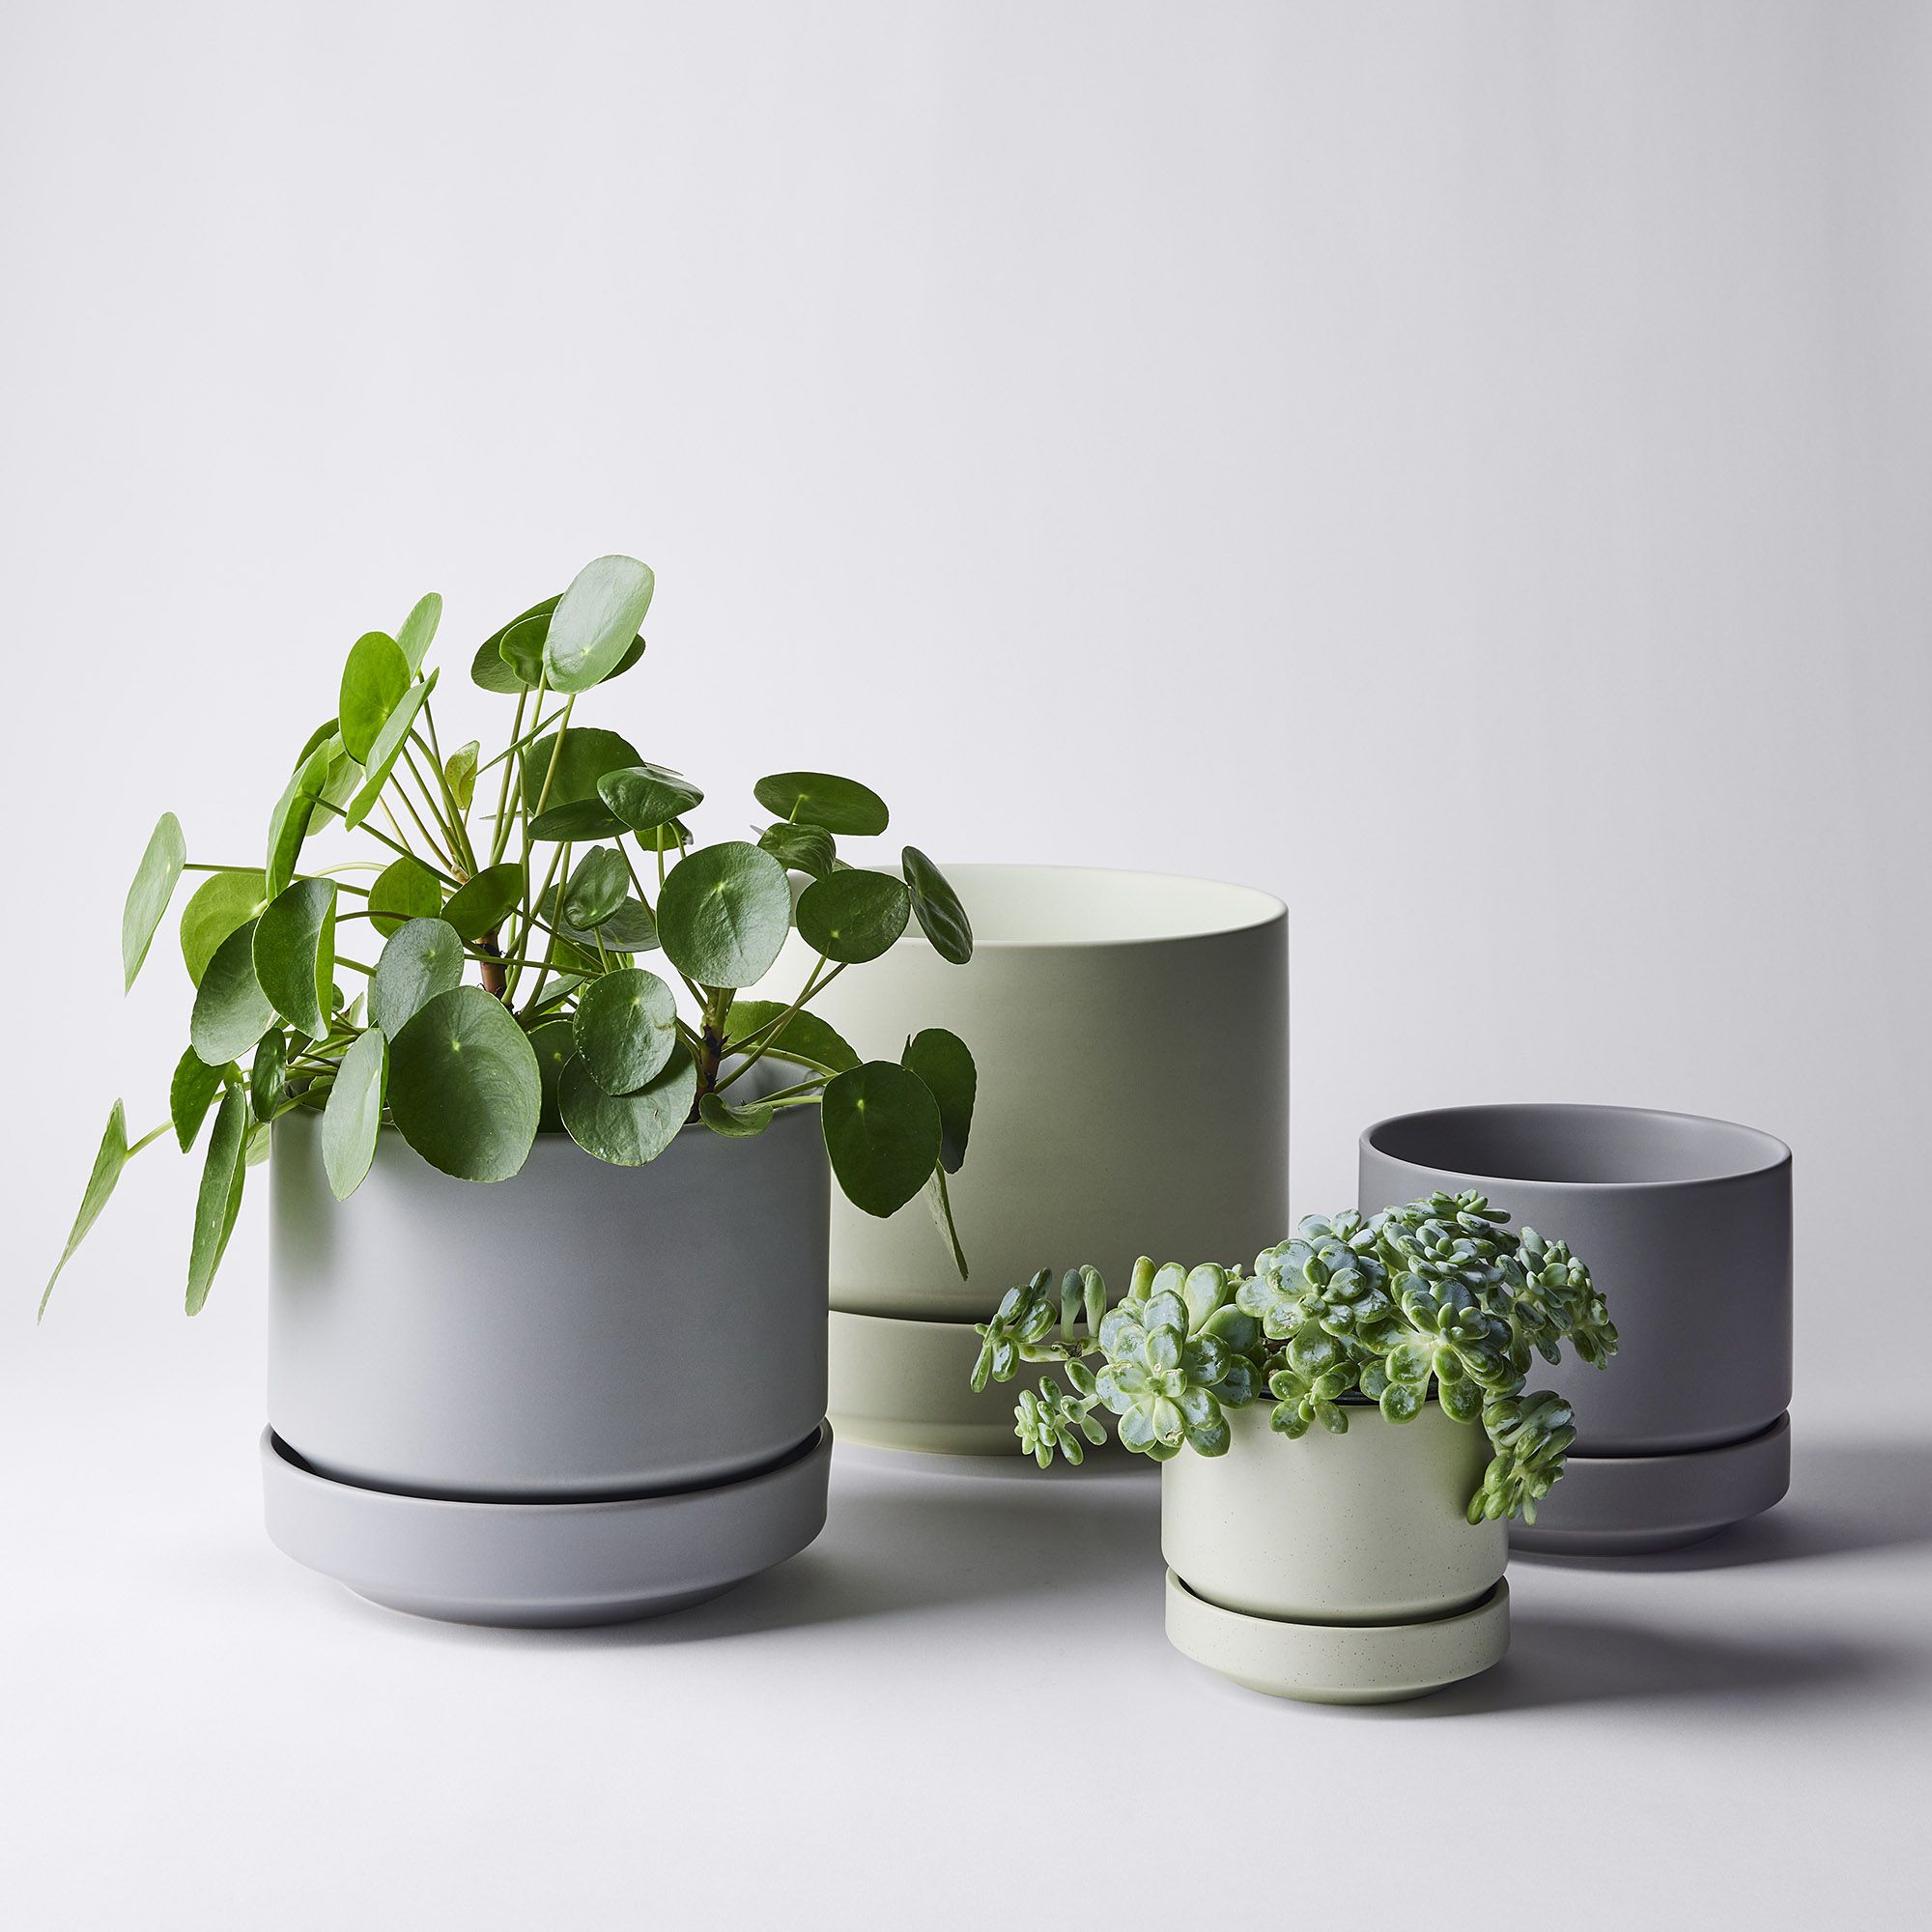 High-Fired Food52 on Planters Stoneware